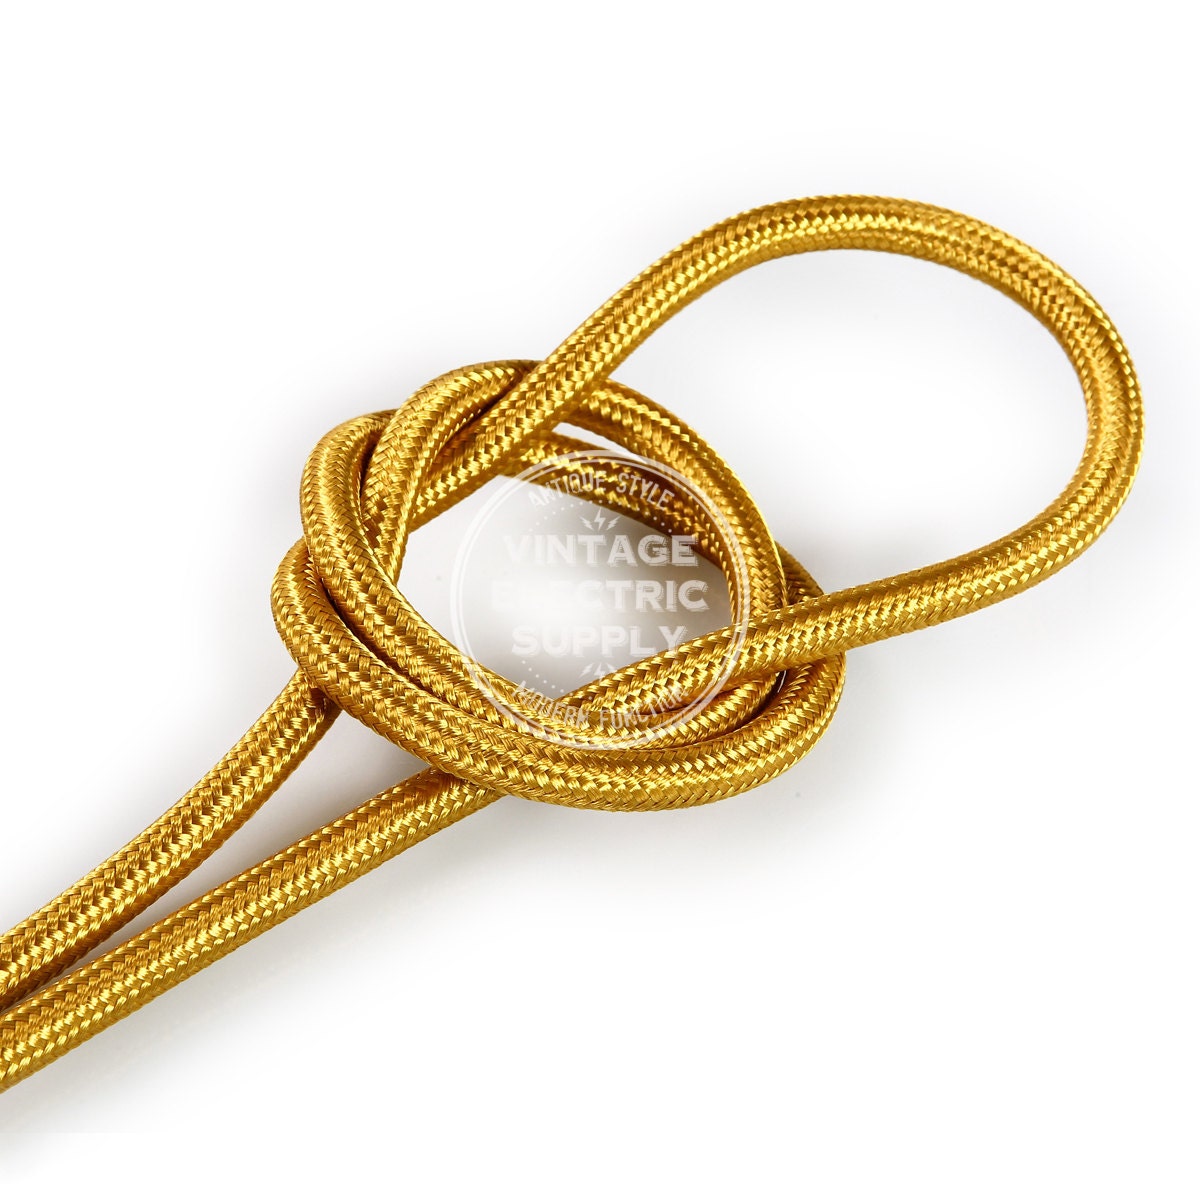 Gold Cloth Covered Cord Set with Antique Style Plug